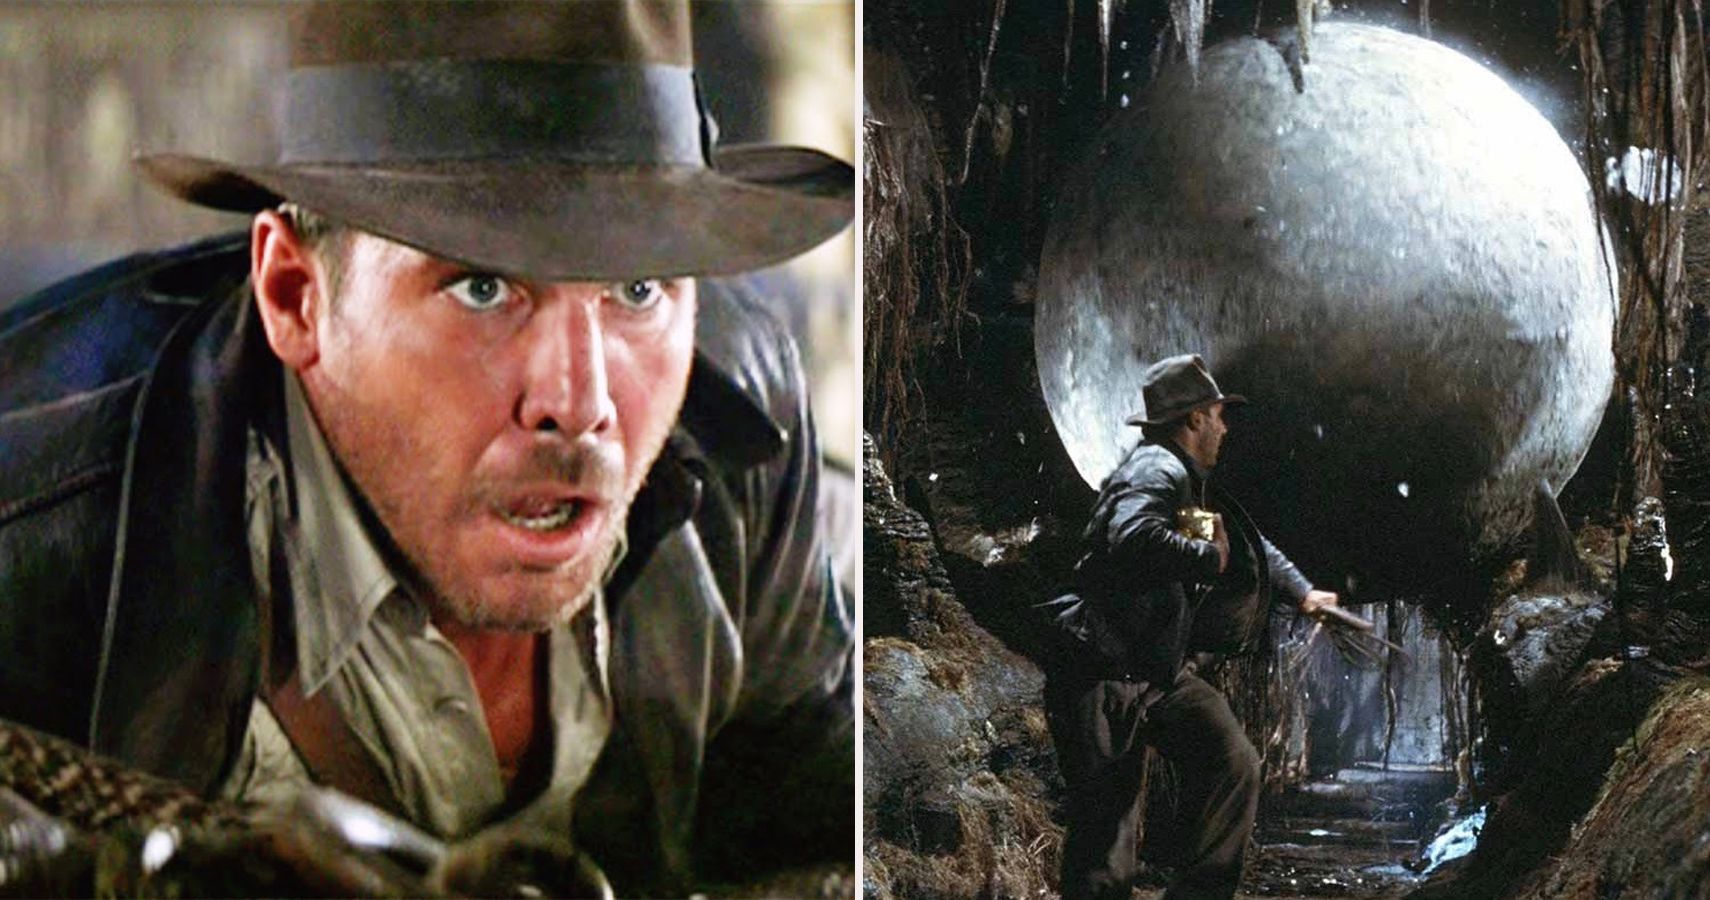 Indiana Jones': 10 Wildest Behind-the-Scenes Details About the Movies